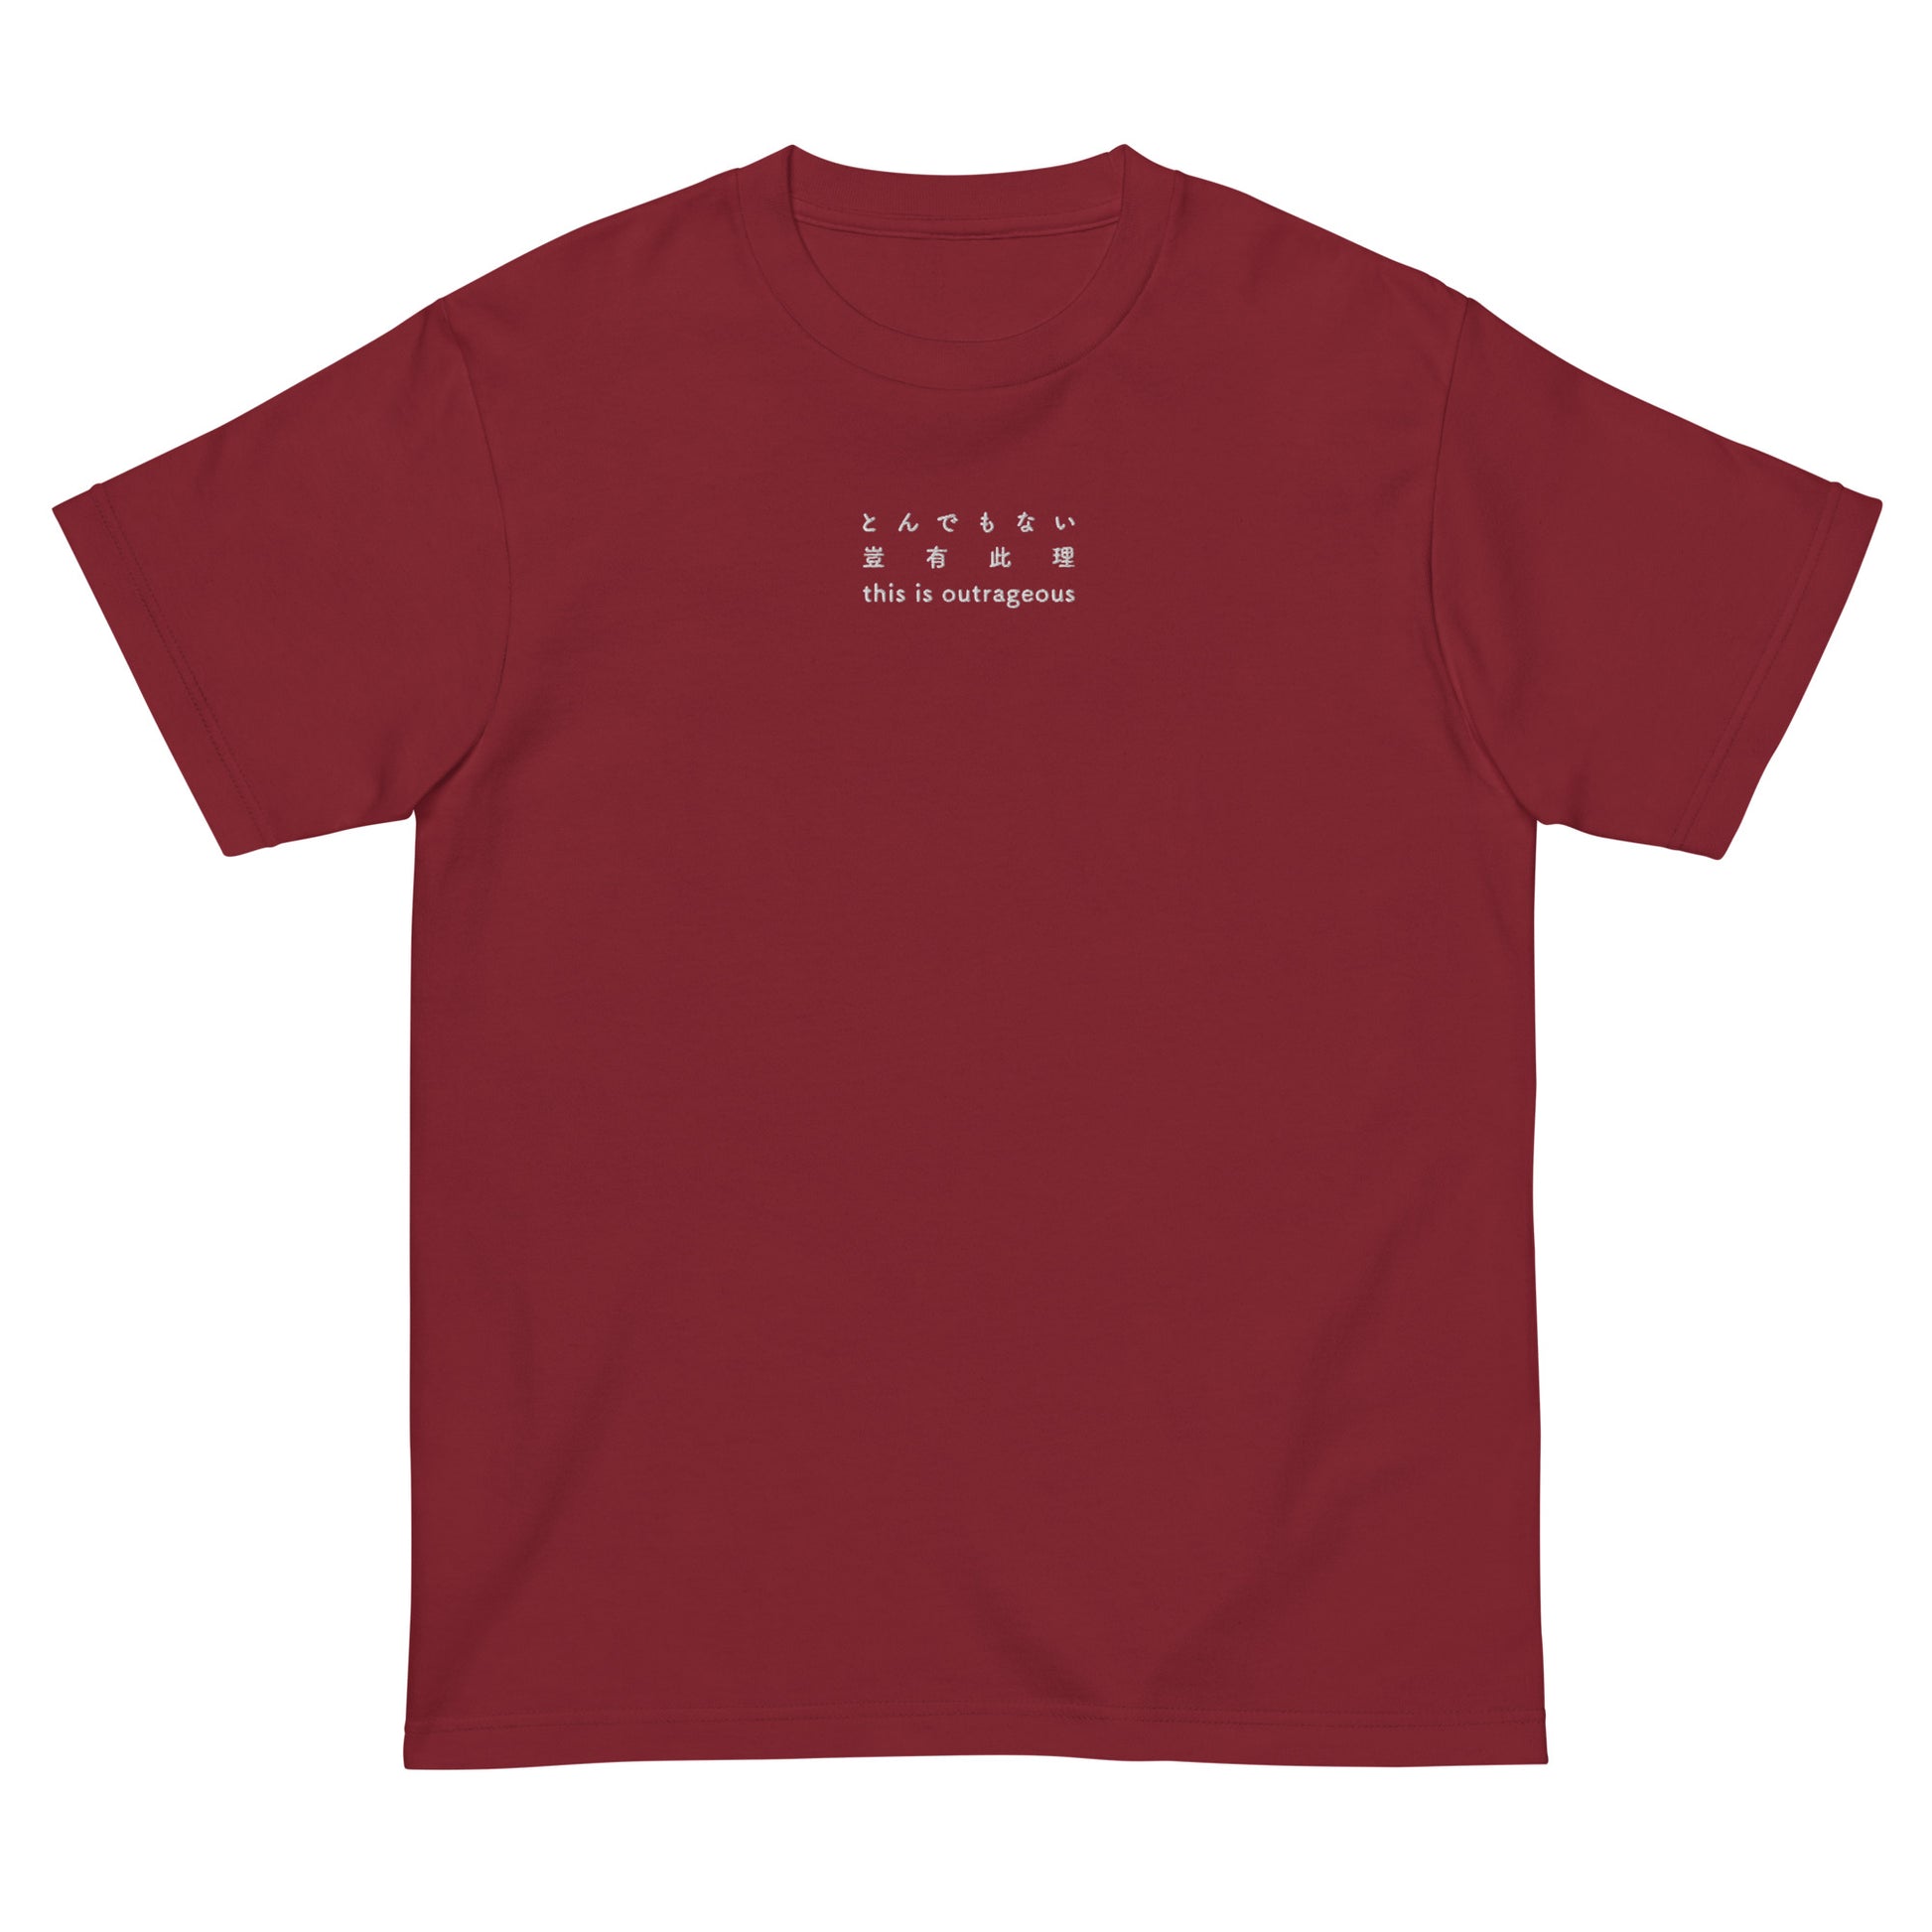 Wine Red High Quality Tee - Front Design with an White Embroidery "This is Outrageous" in Japanese, Chinese and English